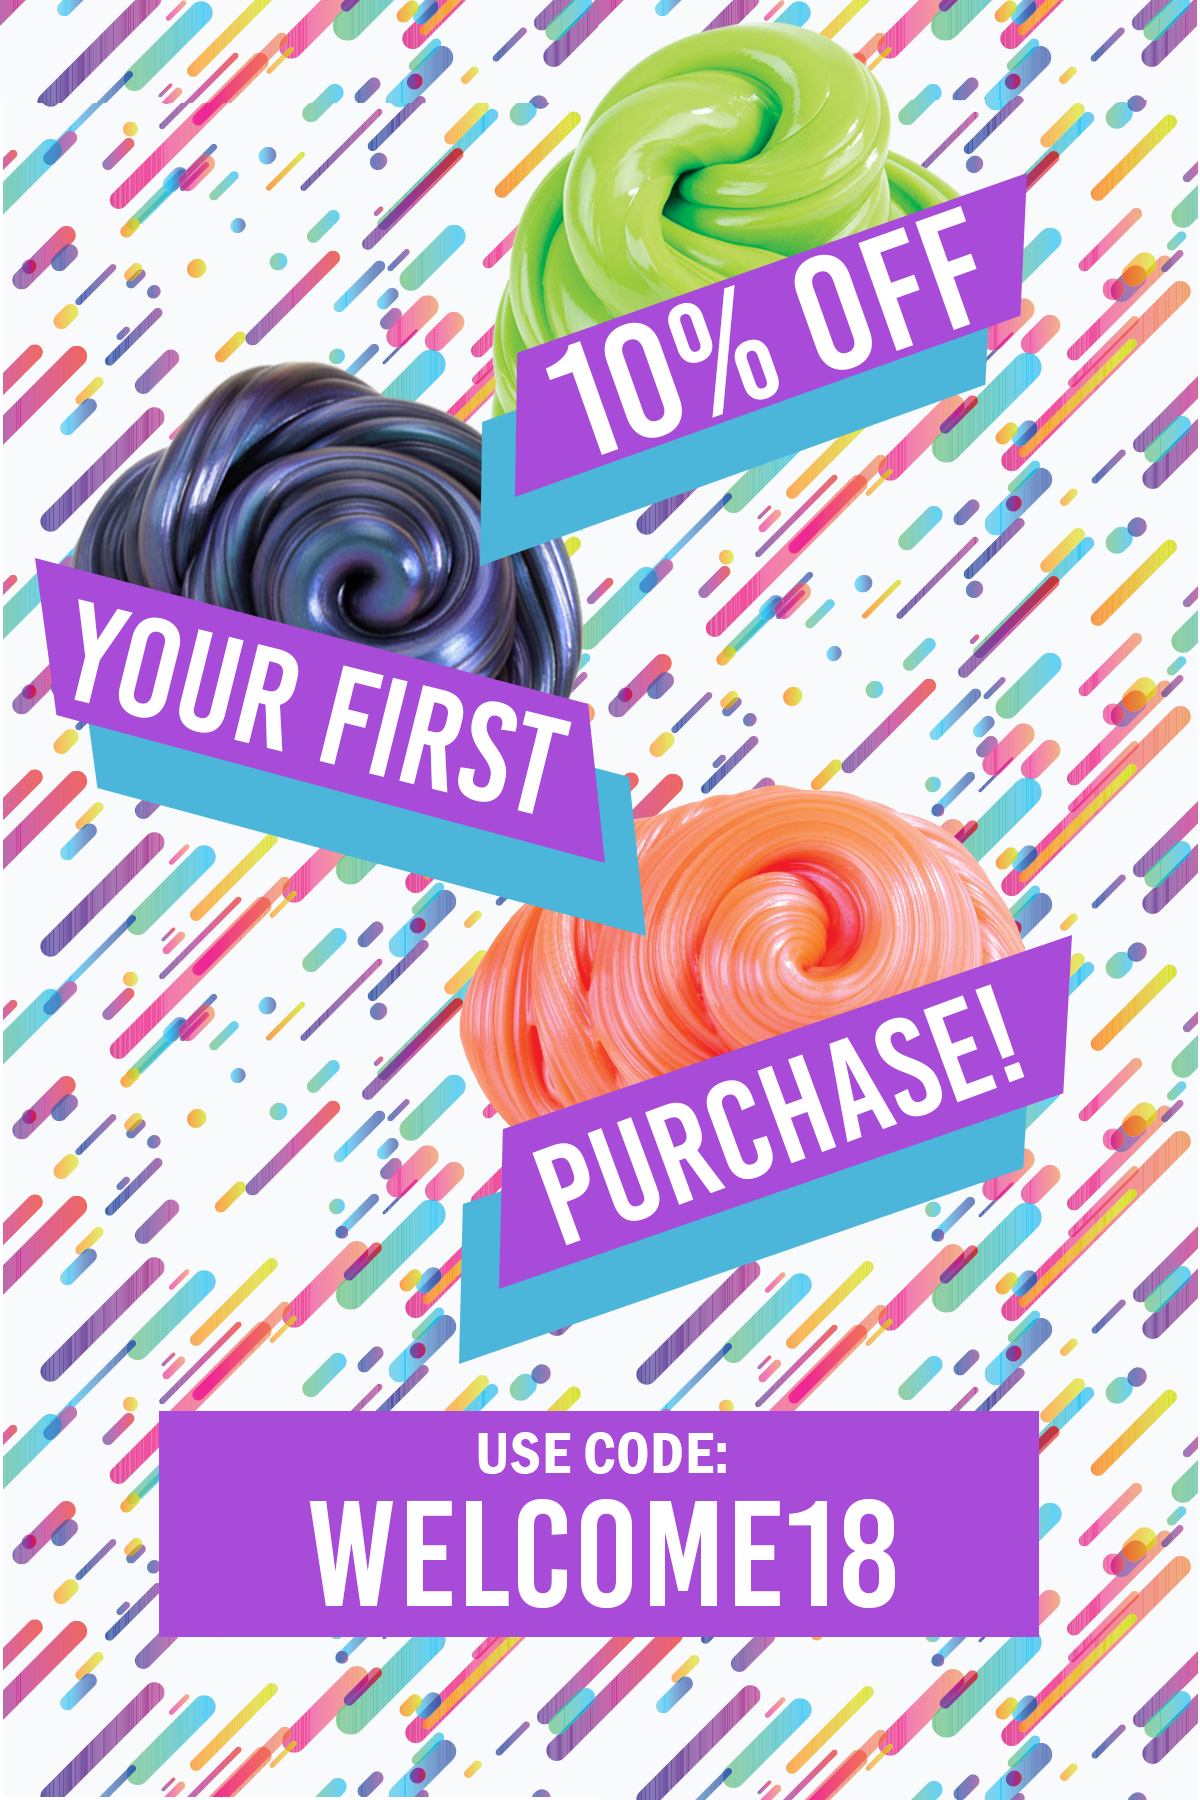 Take 10% off your first purchase with code WELCOME18